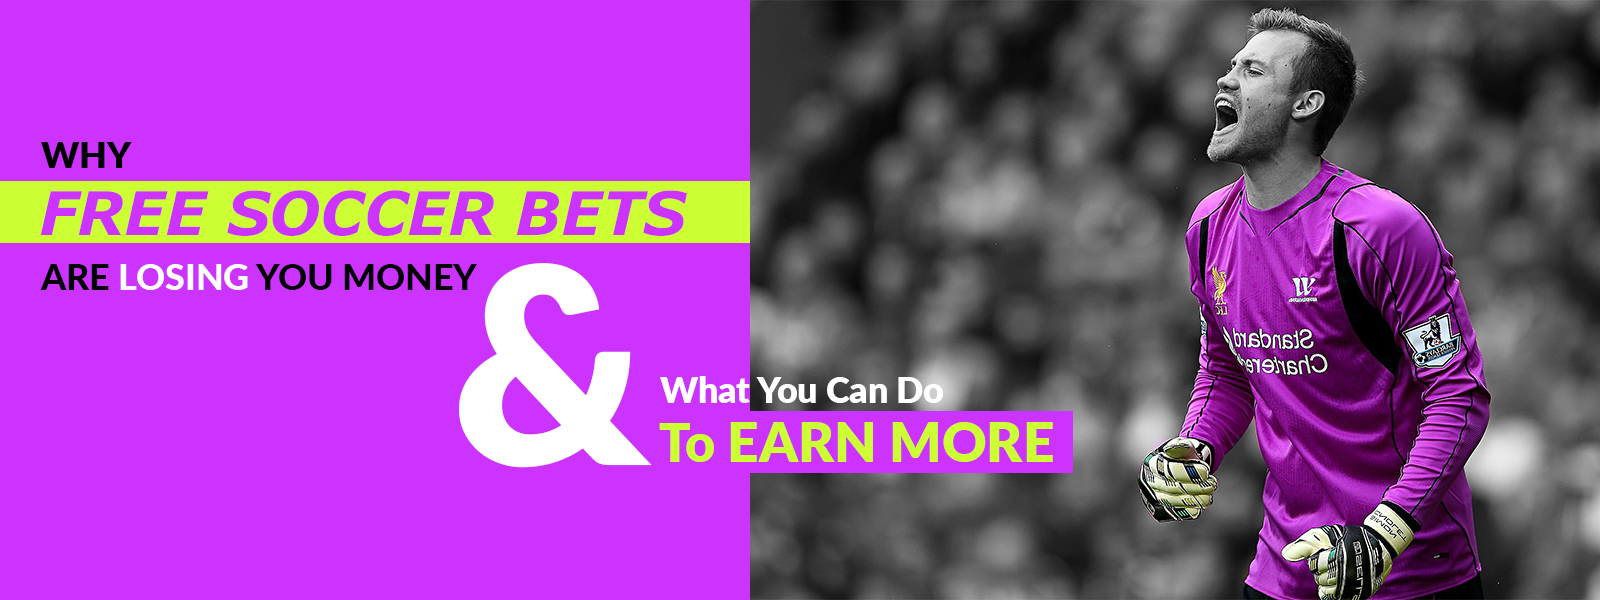 Free Soccer Bets Causing You To Lose More